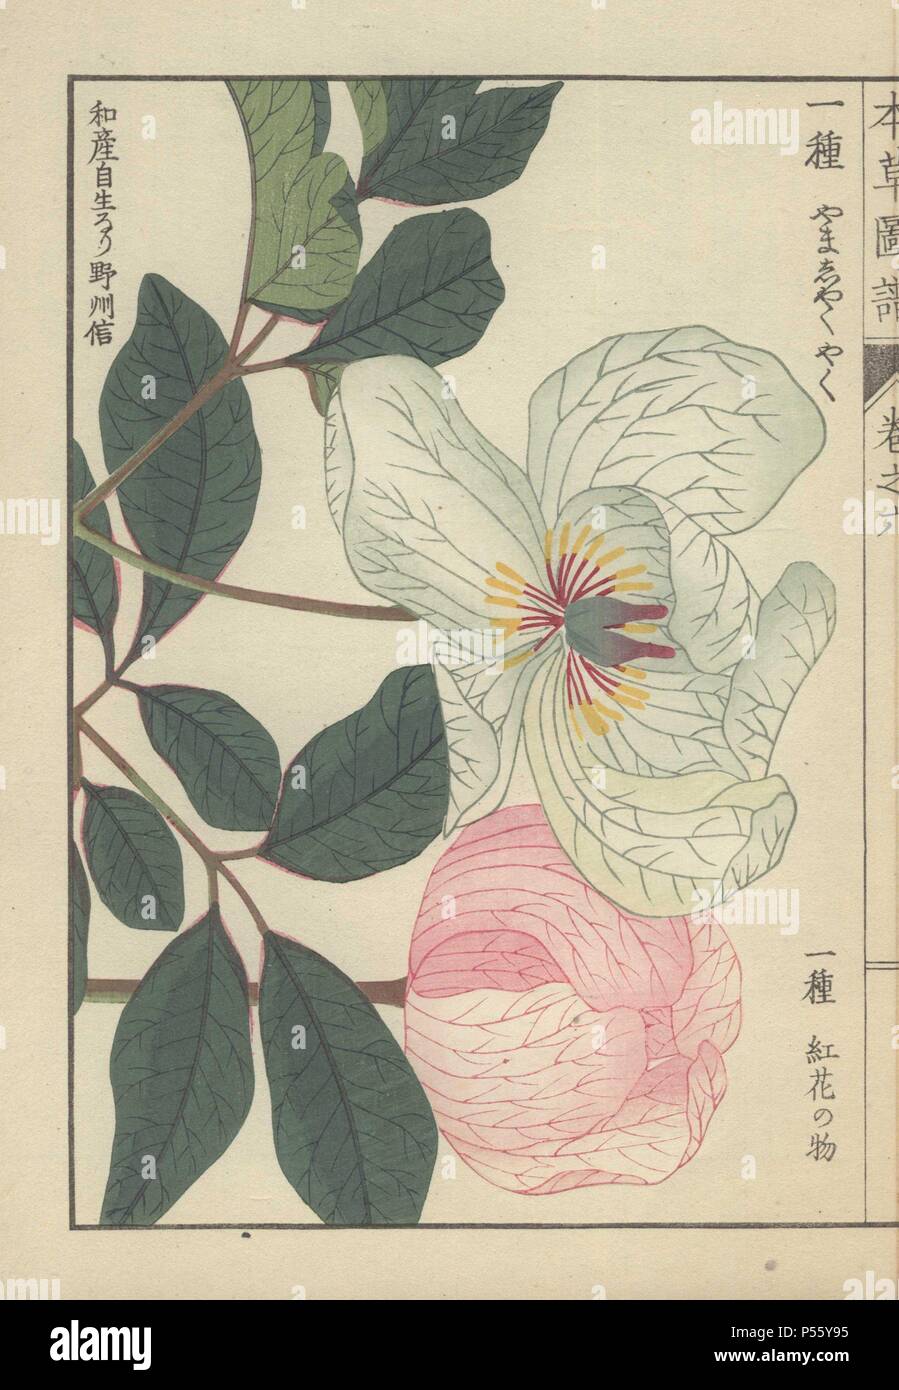 Two peony flowers: one white with pale green veins, petals open to reveal red stamen and yellow pollen; and one pale pink with red veins, closed, round. Dark green leaves. Paeonia obovata. Yama shakuyaku. Colour-printed woodblock engraving by Kan'en Iwasaki from 'Honzo Zufu,' an Illustrated Guide to Medicinal Plants, 1884. Iwasaki (1786-1842) was a Japanese botanist, entomologist and zoologist. He was one of the first Japanese botanists to incorporate western knowledge into his studies. Stock Photo